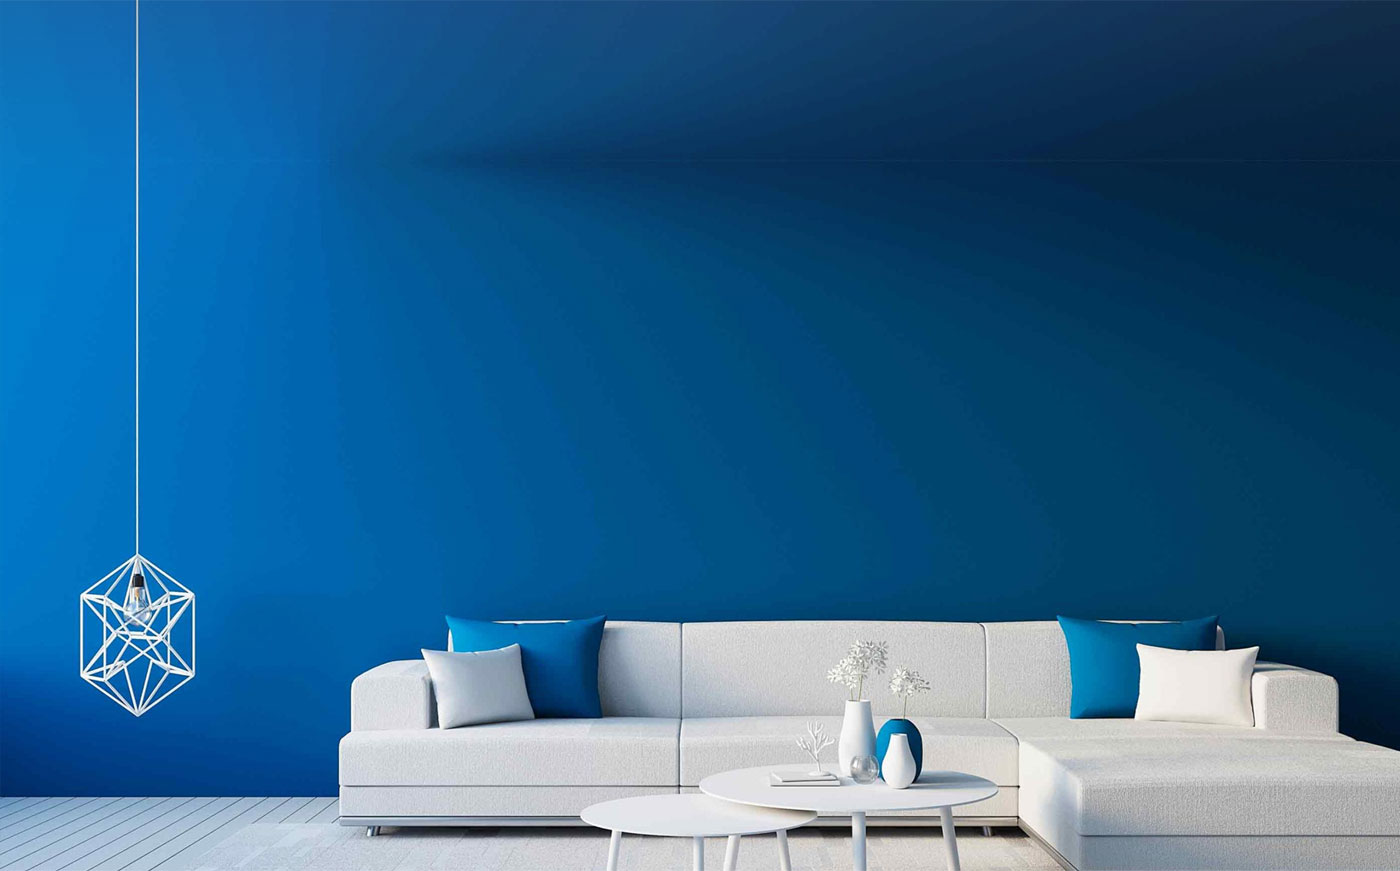 We paint your home a New Colorful Life